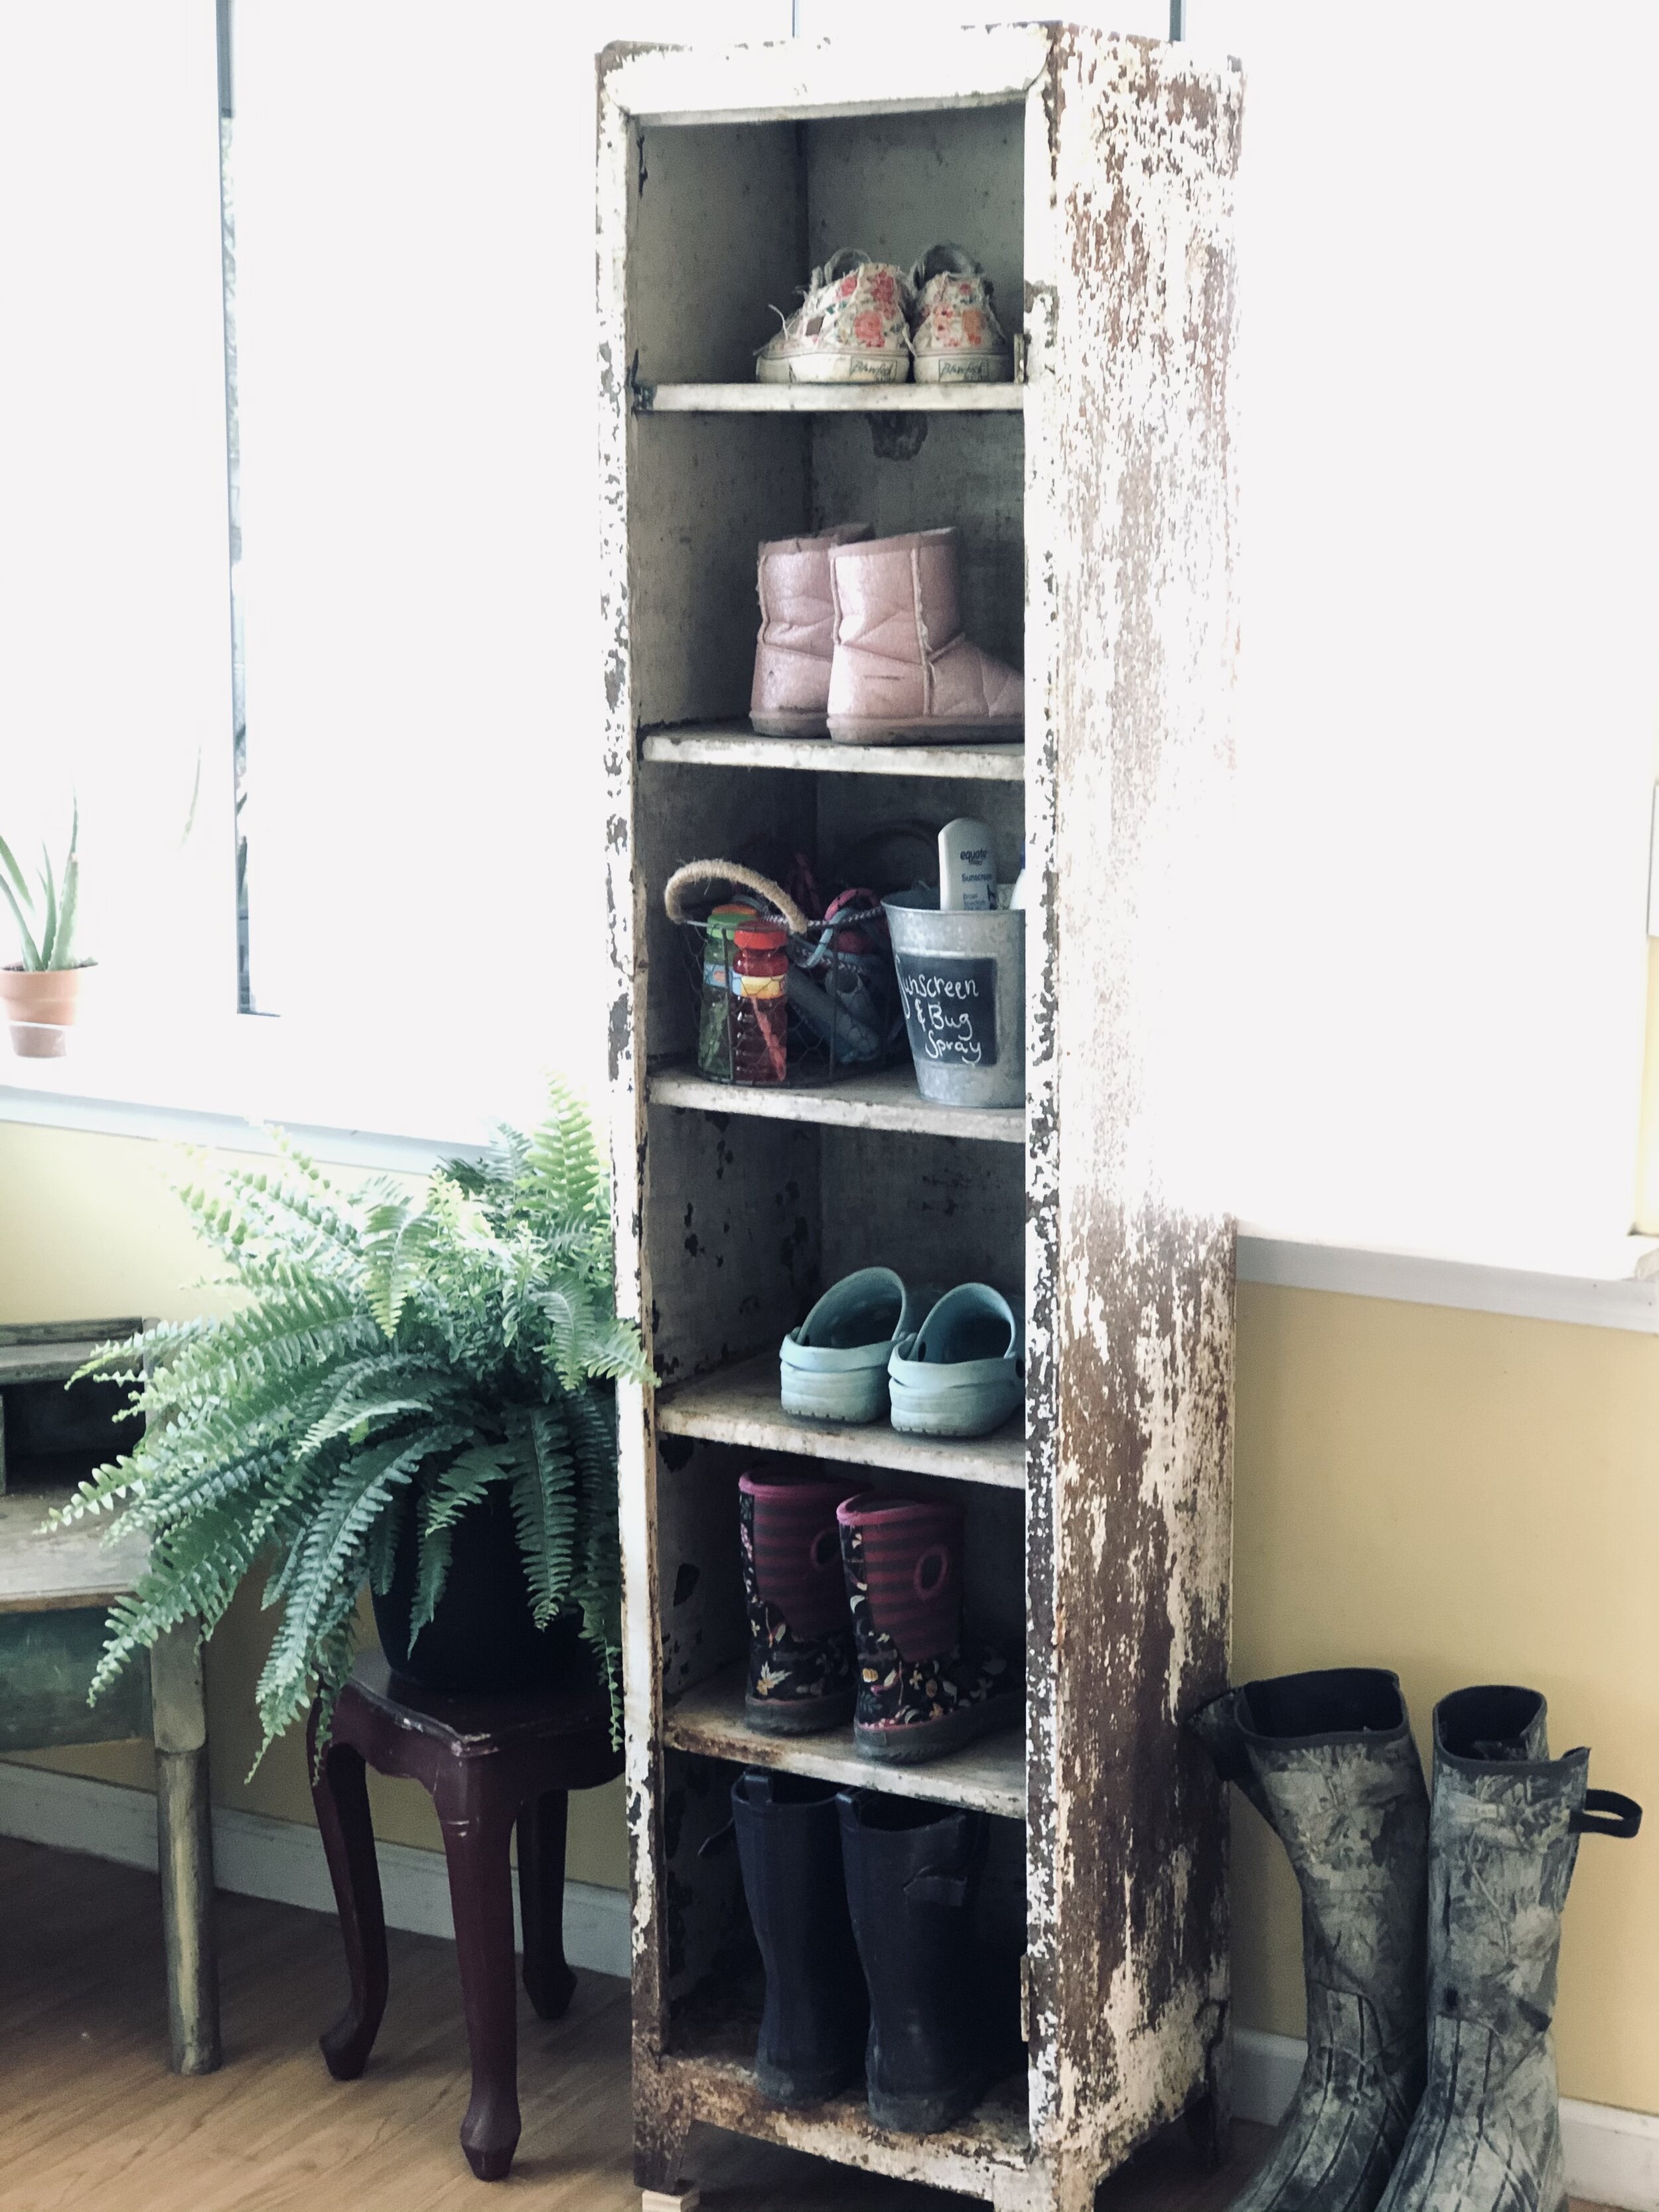 Rusty locker / metal cabinet repurposed for a mudroom sunporch. Turn an antique chipped paint locker into a shoe holder for your mudroom. Frugal rustic farmhouse furniture for your storage needs.